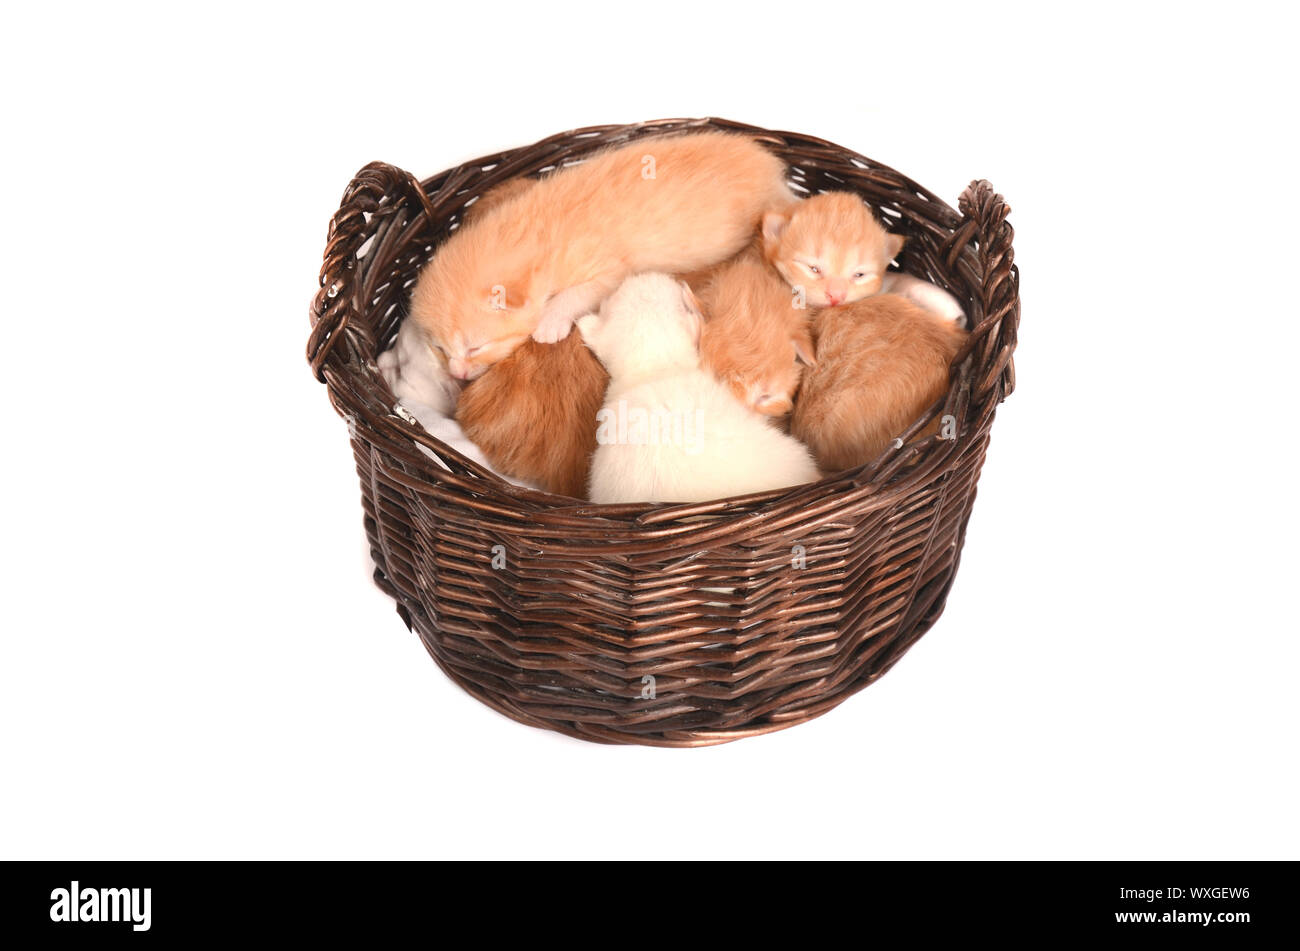 Newborn ginger, orange, marmalade and champagne kittens in a basket. Stock Photo